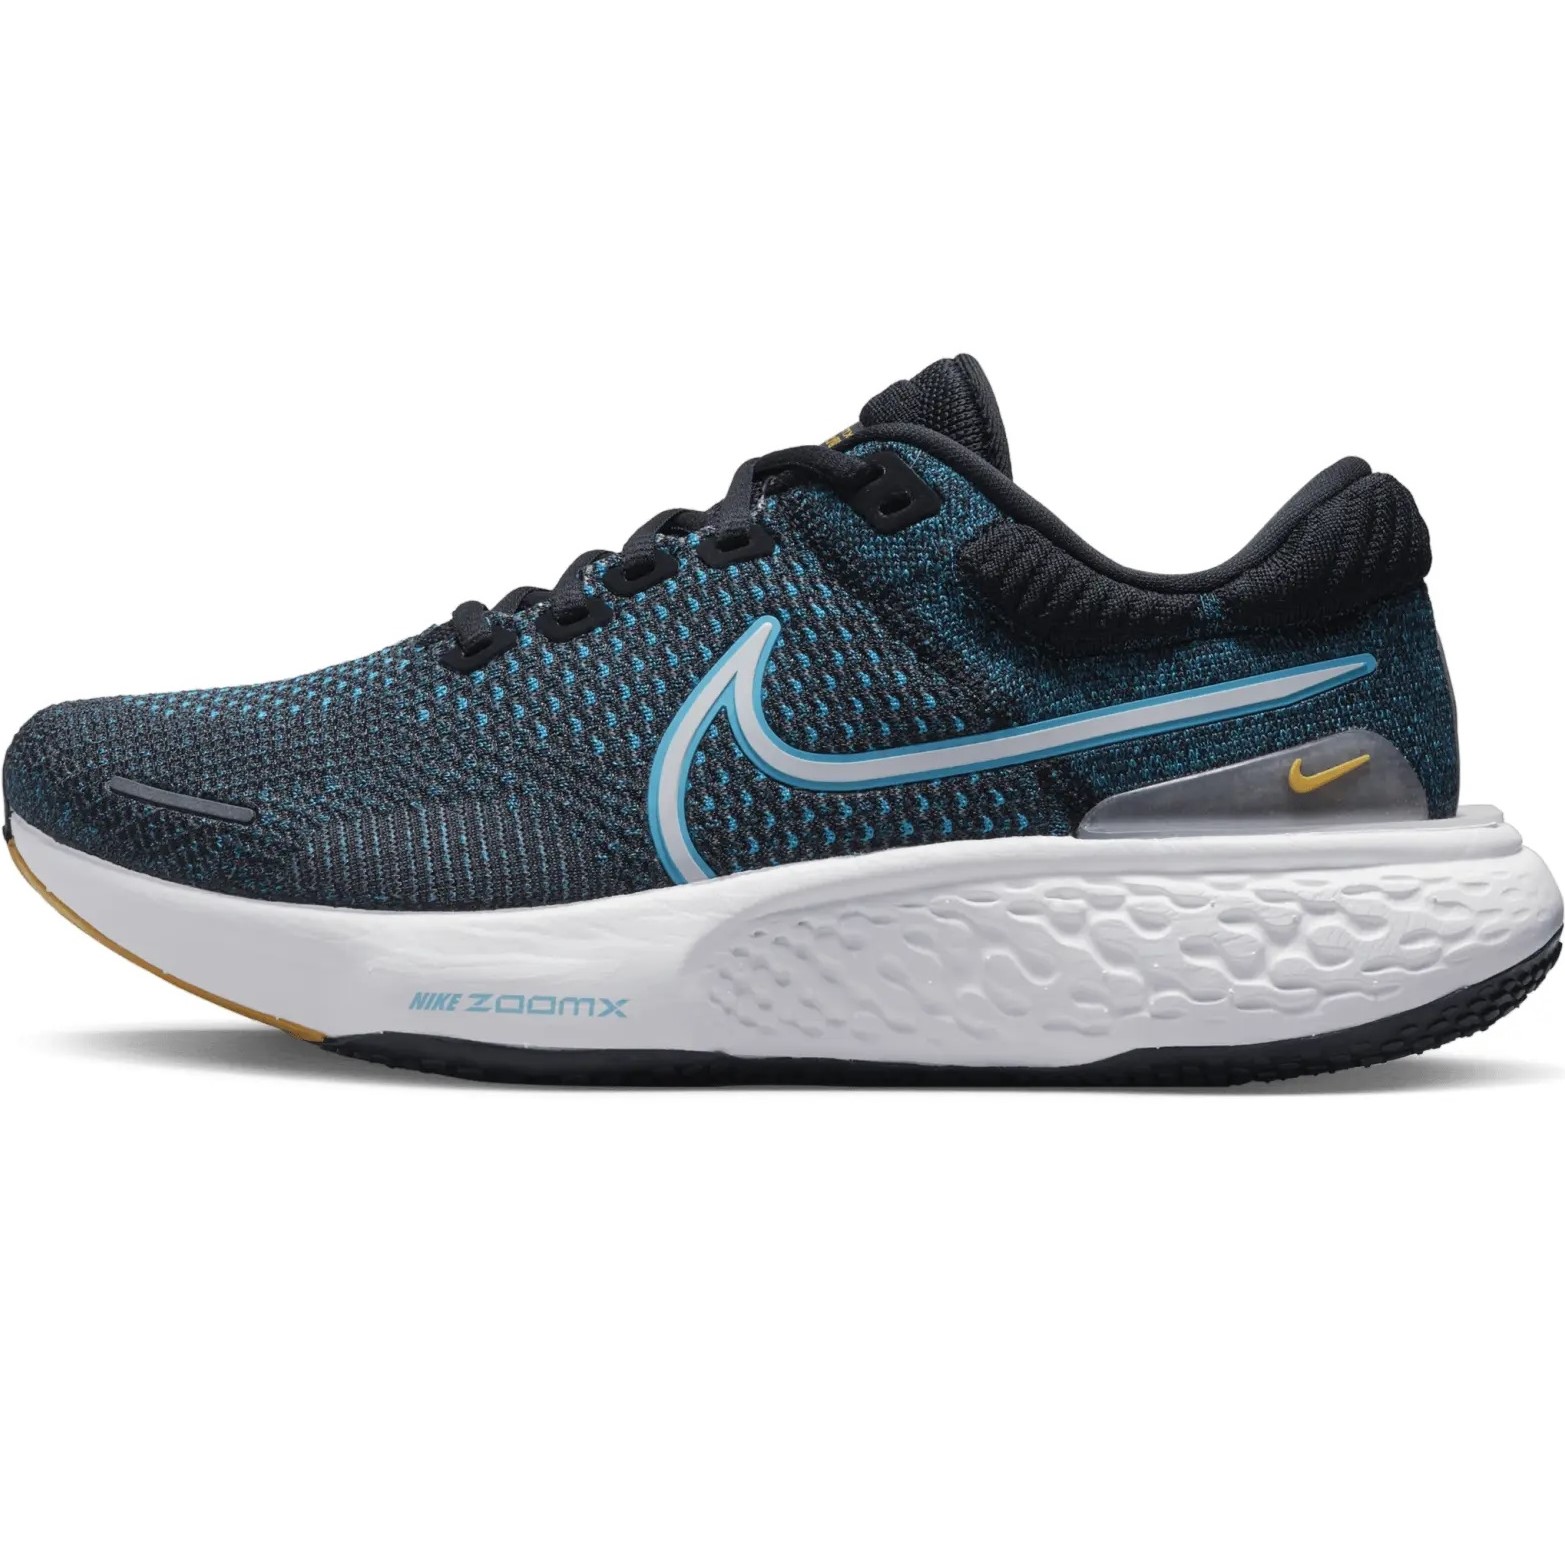 GIÀY THỂ THAO NIKE NAM ZOOMX INVINCIBLE RUN FLYKNIT 2 BLACK CHLORINE BLUE WHITE DH5425-003 6